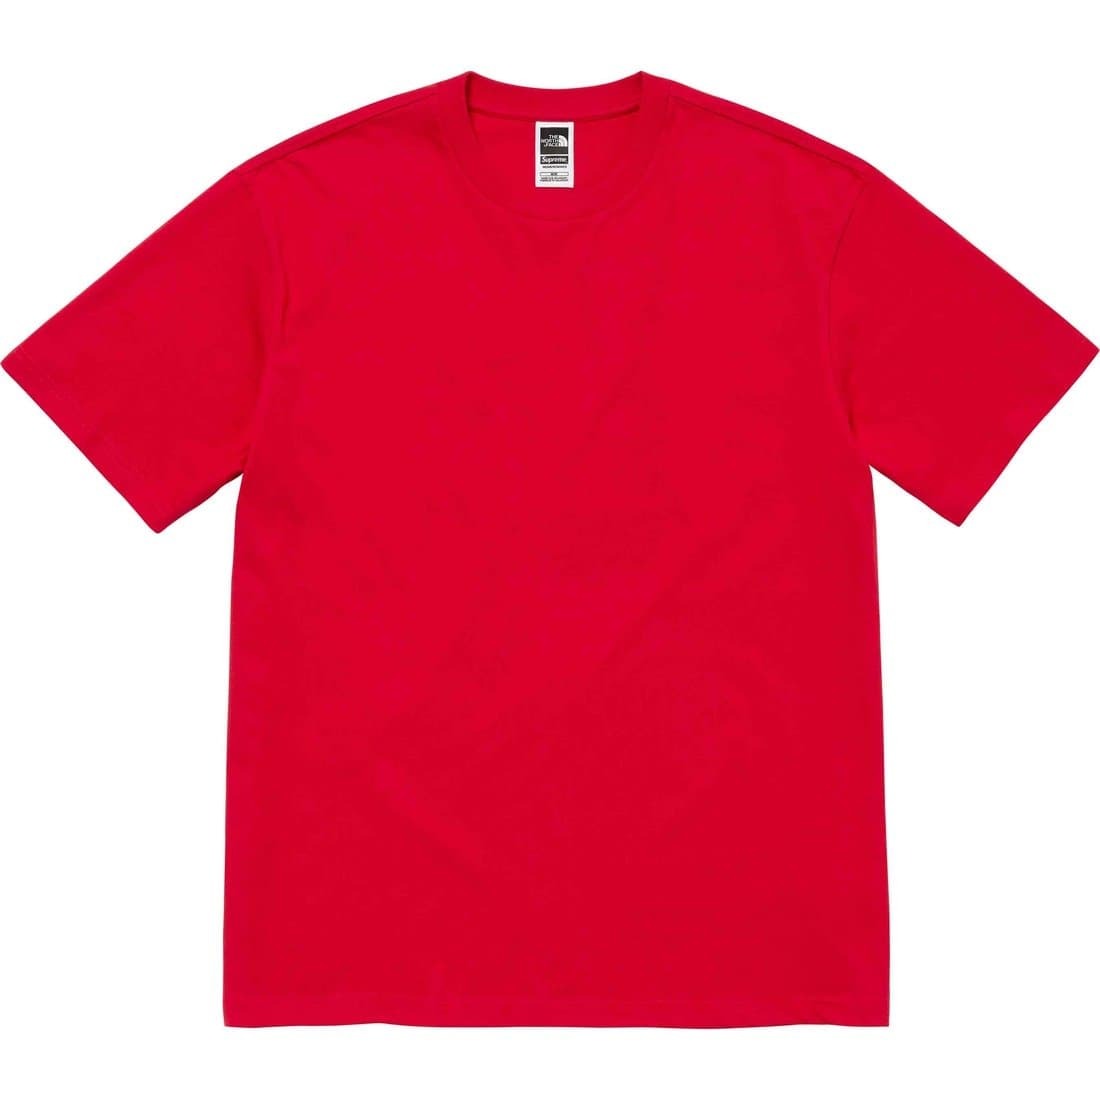 XLサイズ】 24SS Supreme The North Face S/S Top Red 赤 レッド 